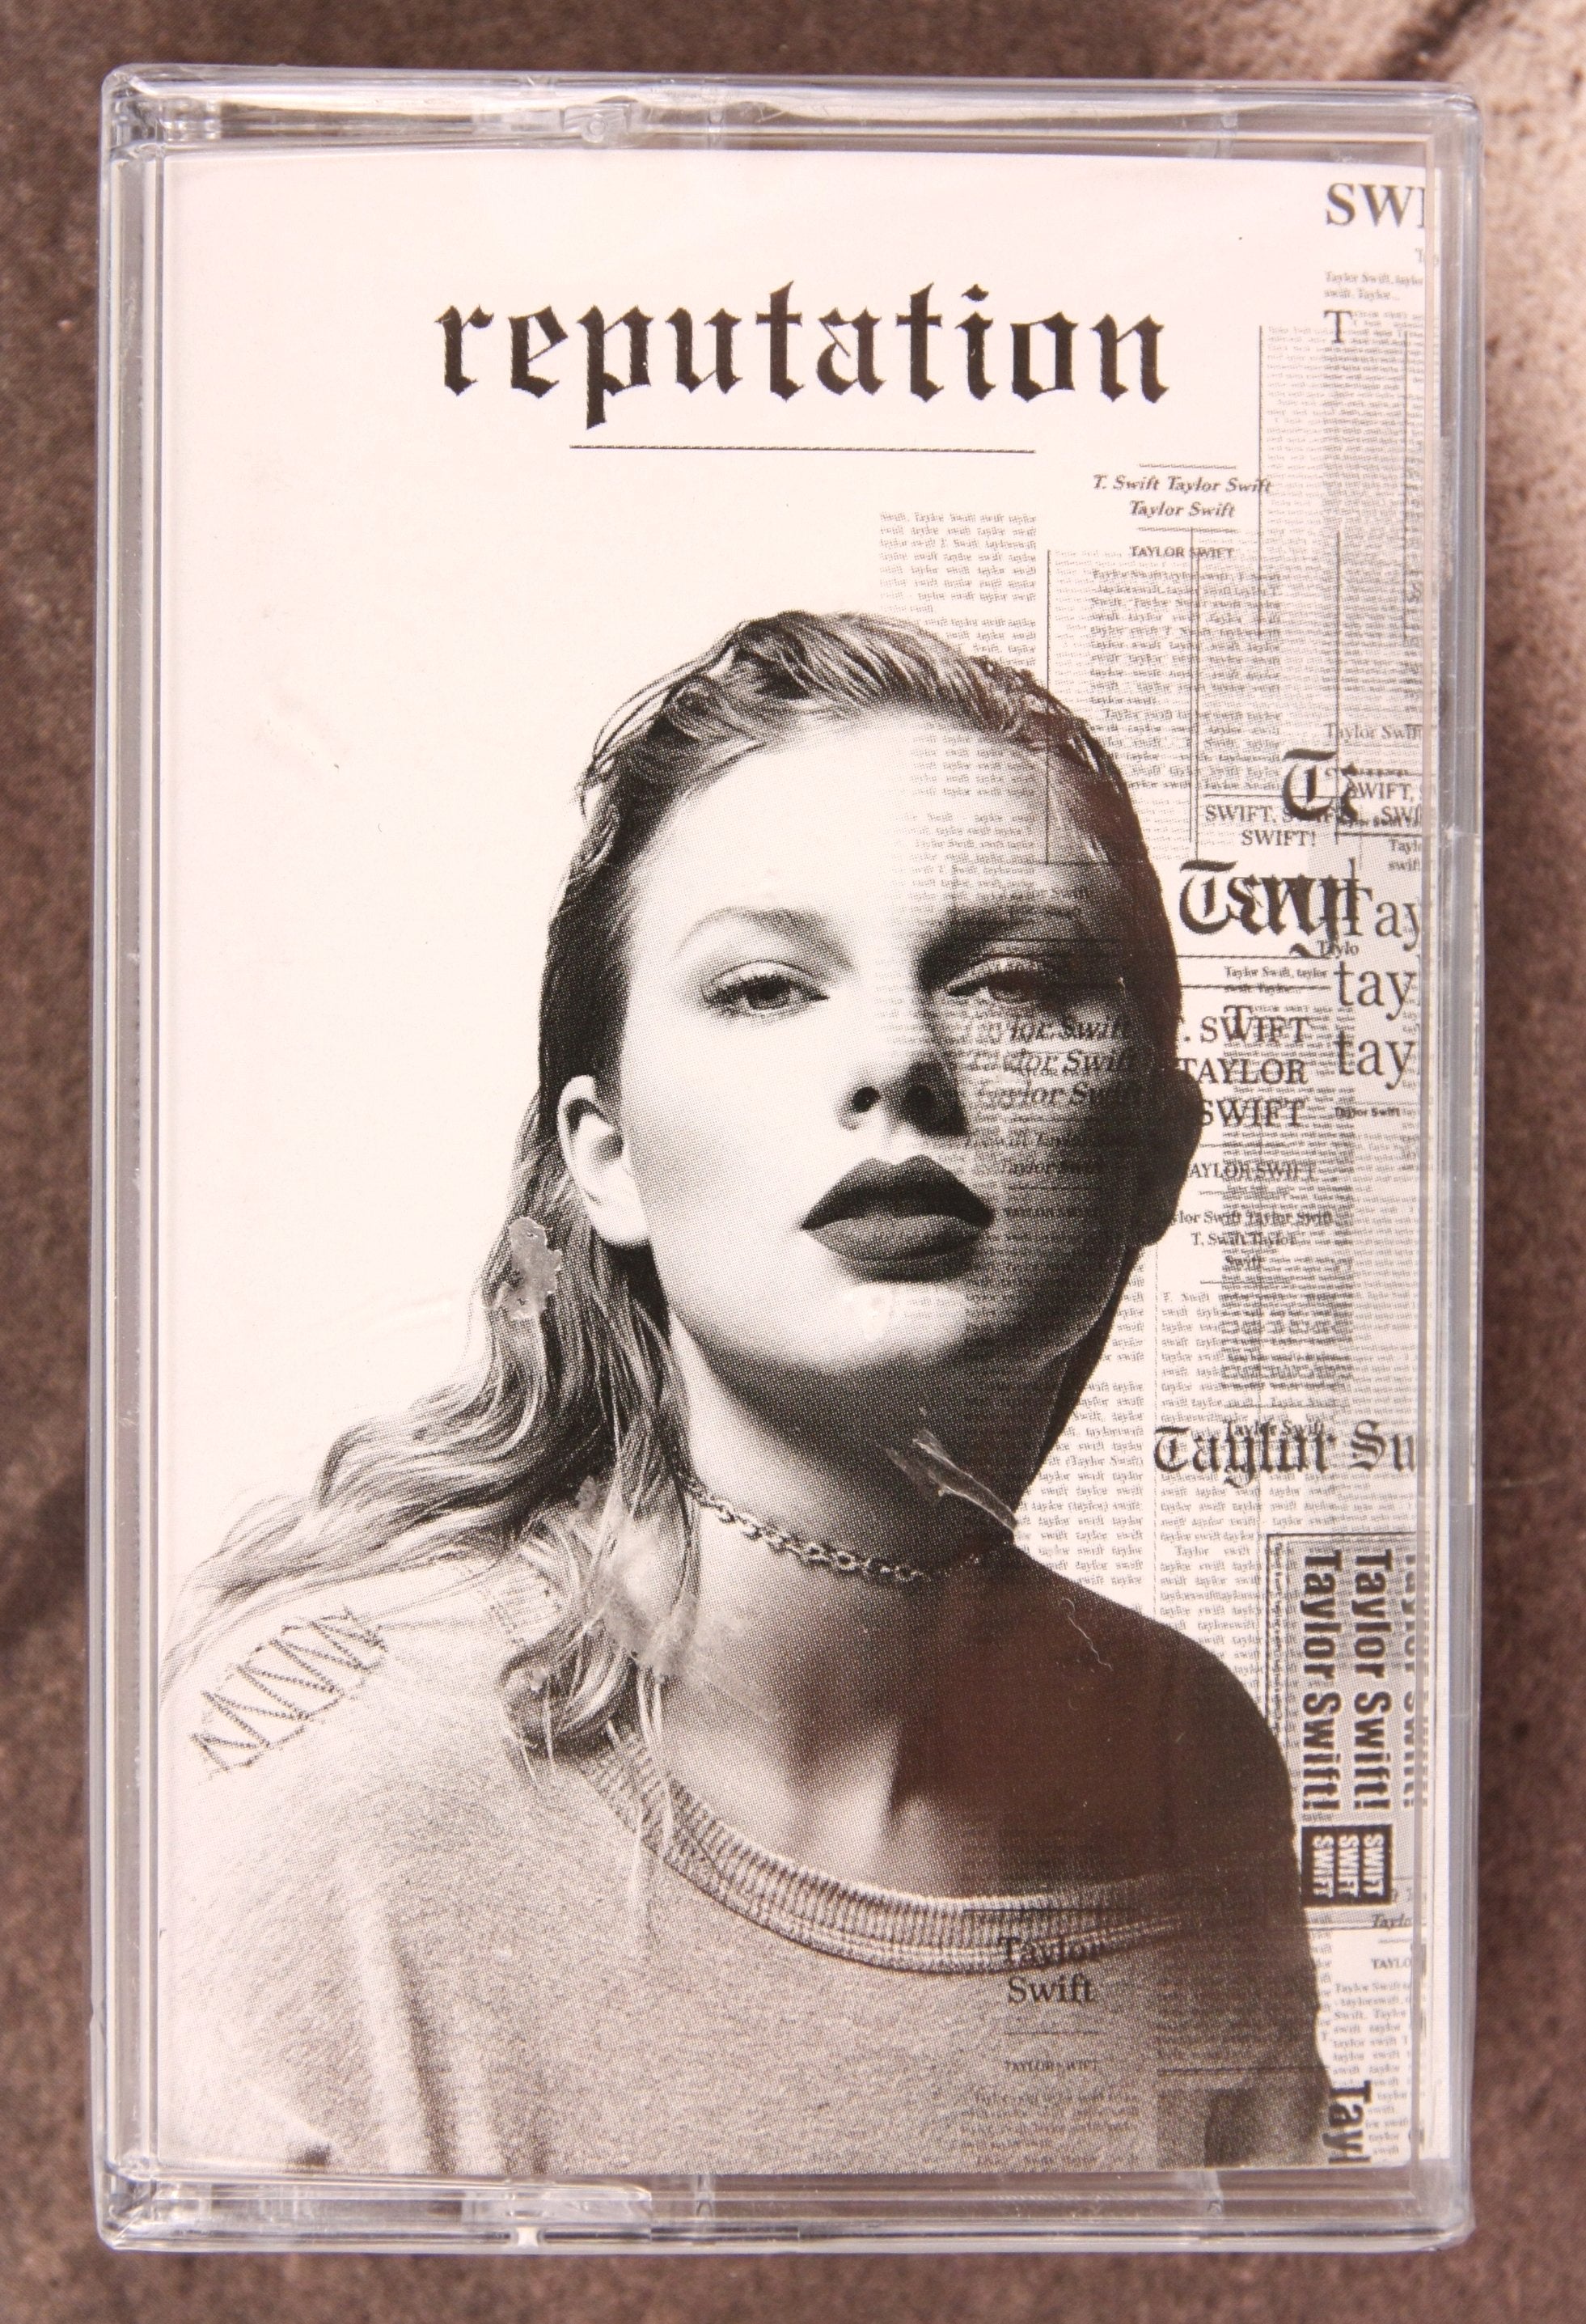 Taylor Swift - Reputation Cassette Tape (Limited Edition)